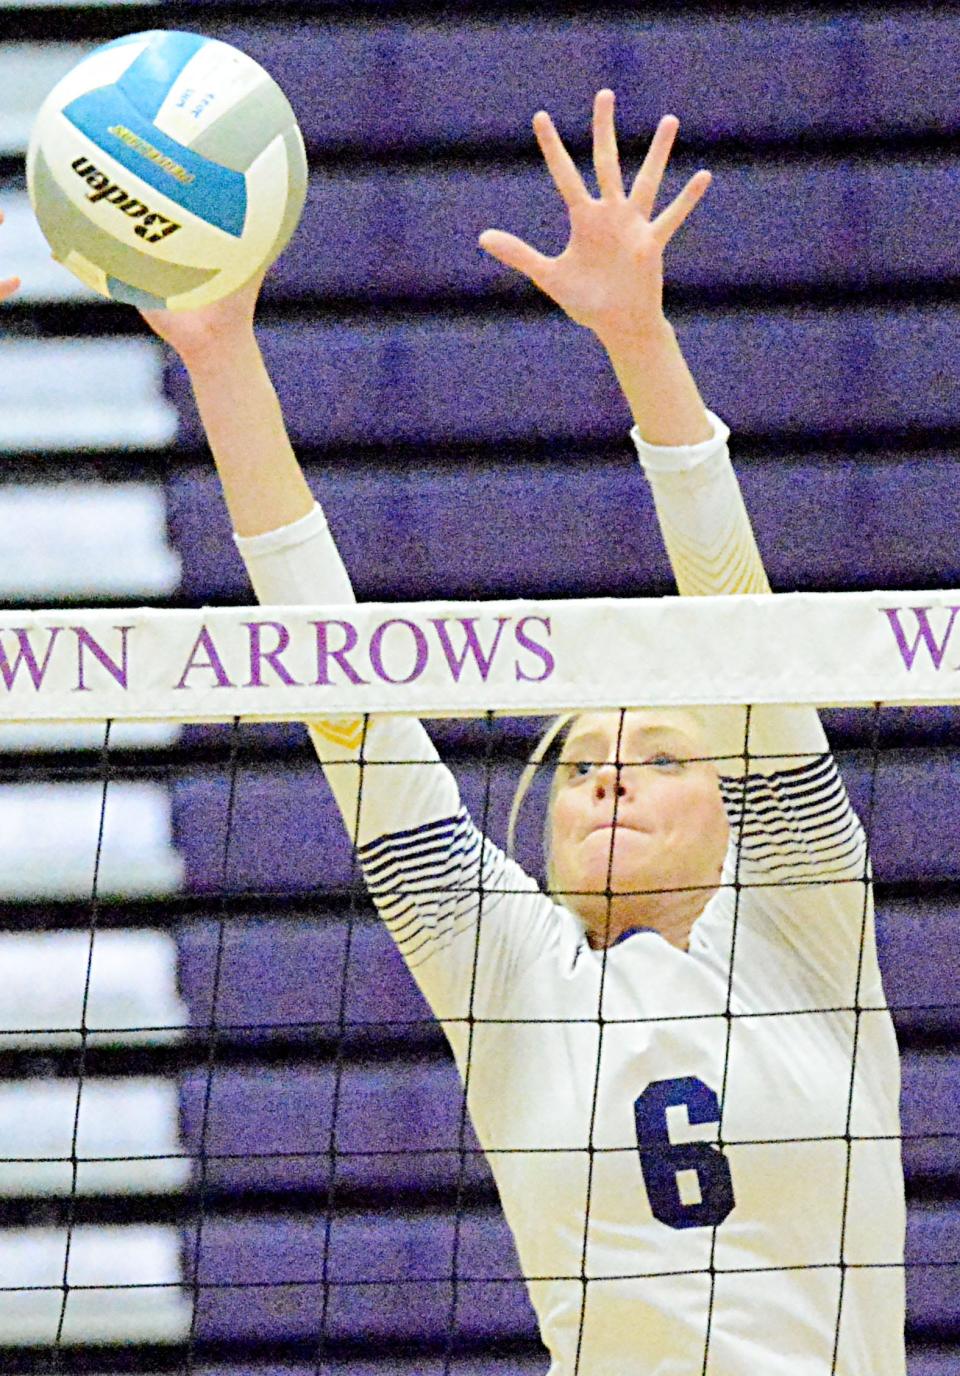 Watertown's Eve Hauger attempts to block the ball during a high school volleyball match against Sioux Falls Lincoln on Tuesday, Oct. 11, 2022 in the Civic Arena. Lincoln won 3-1.